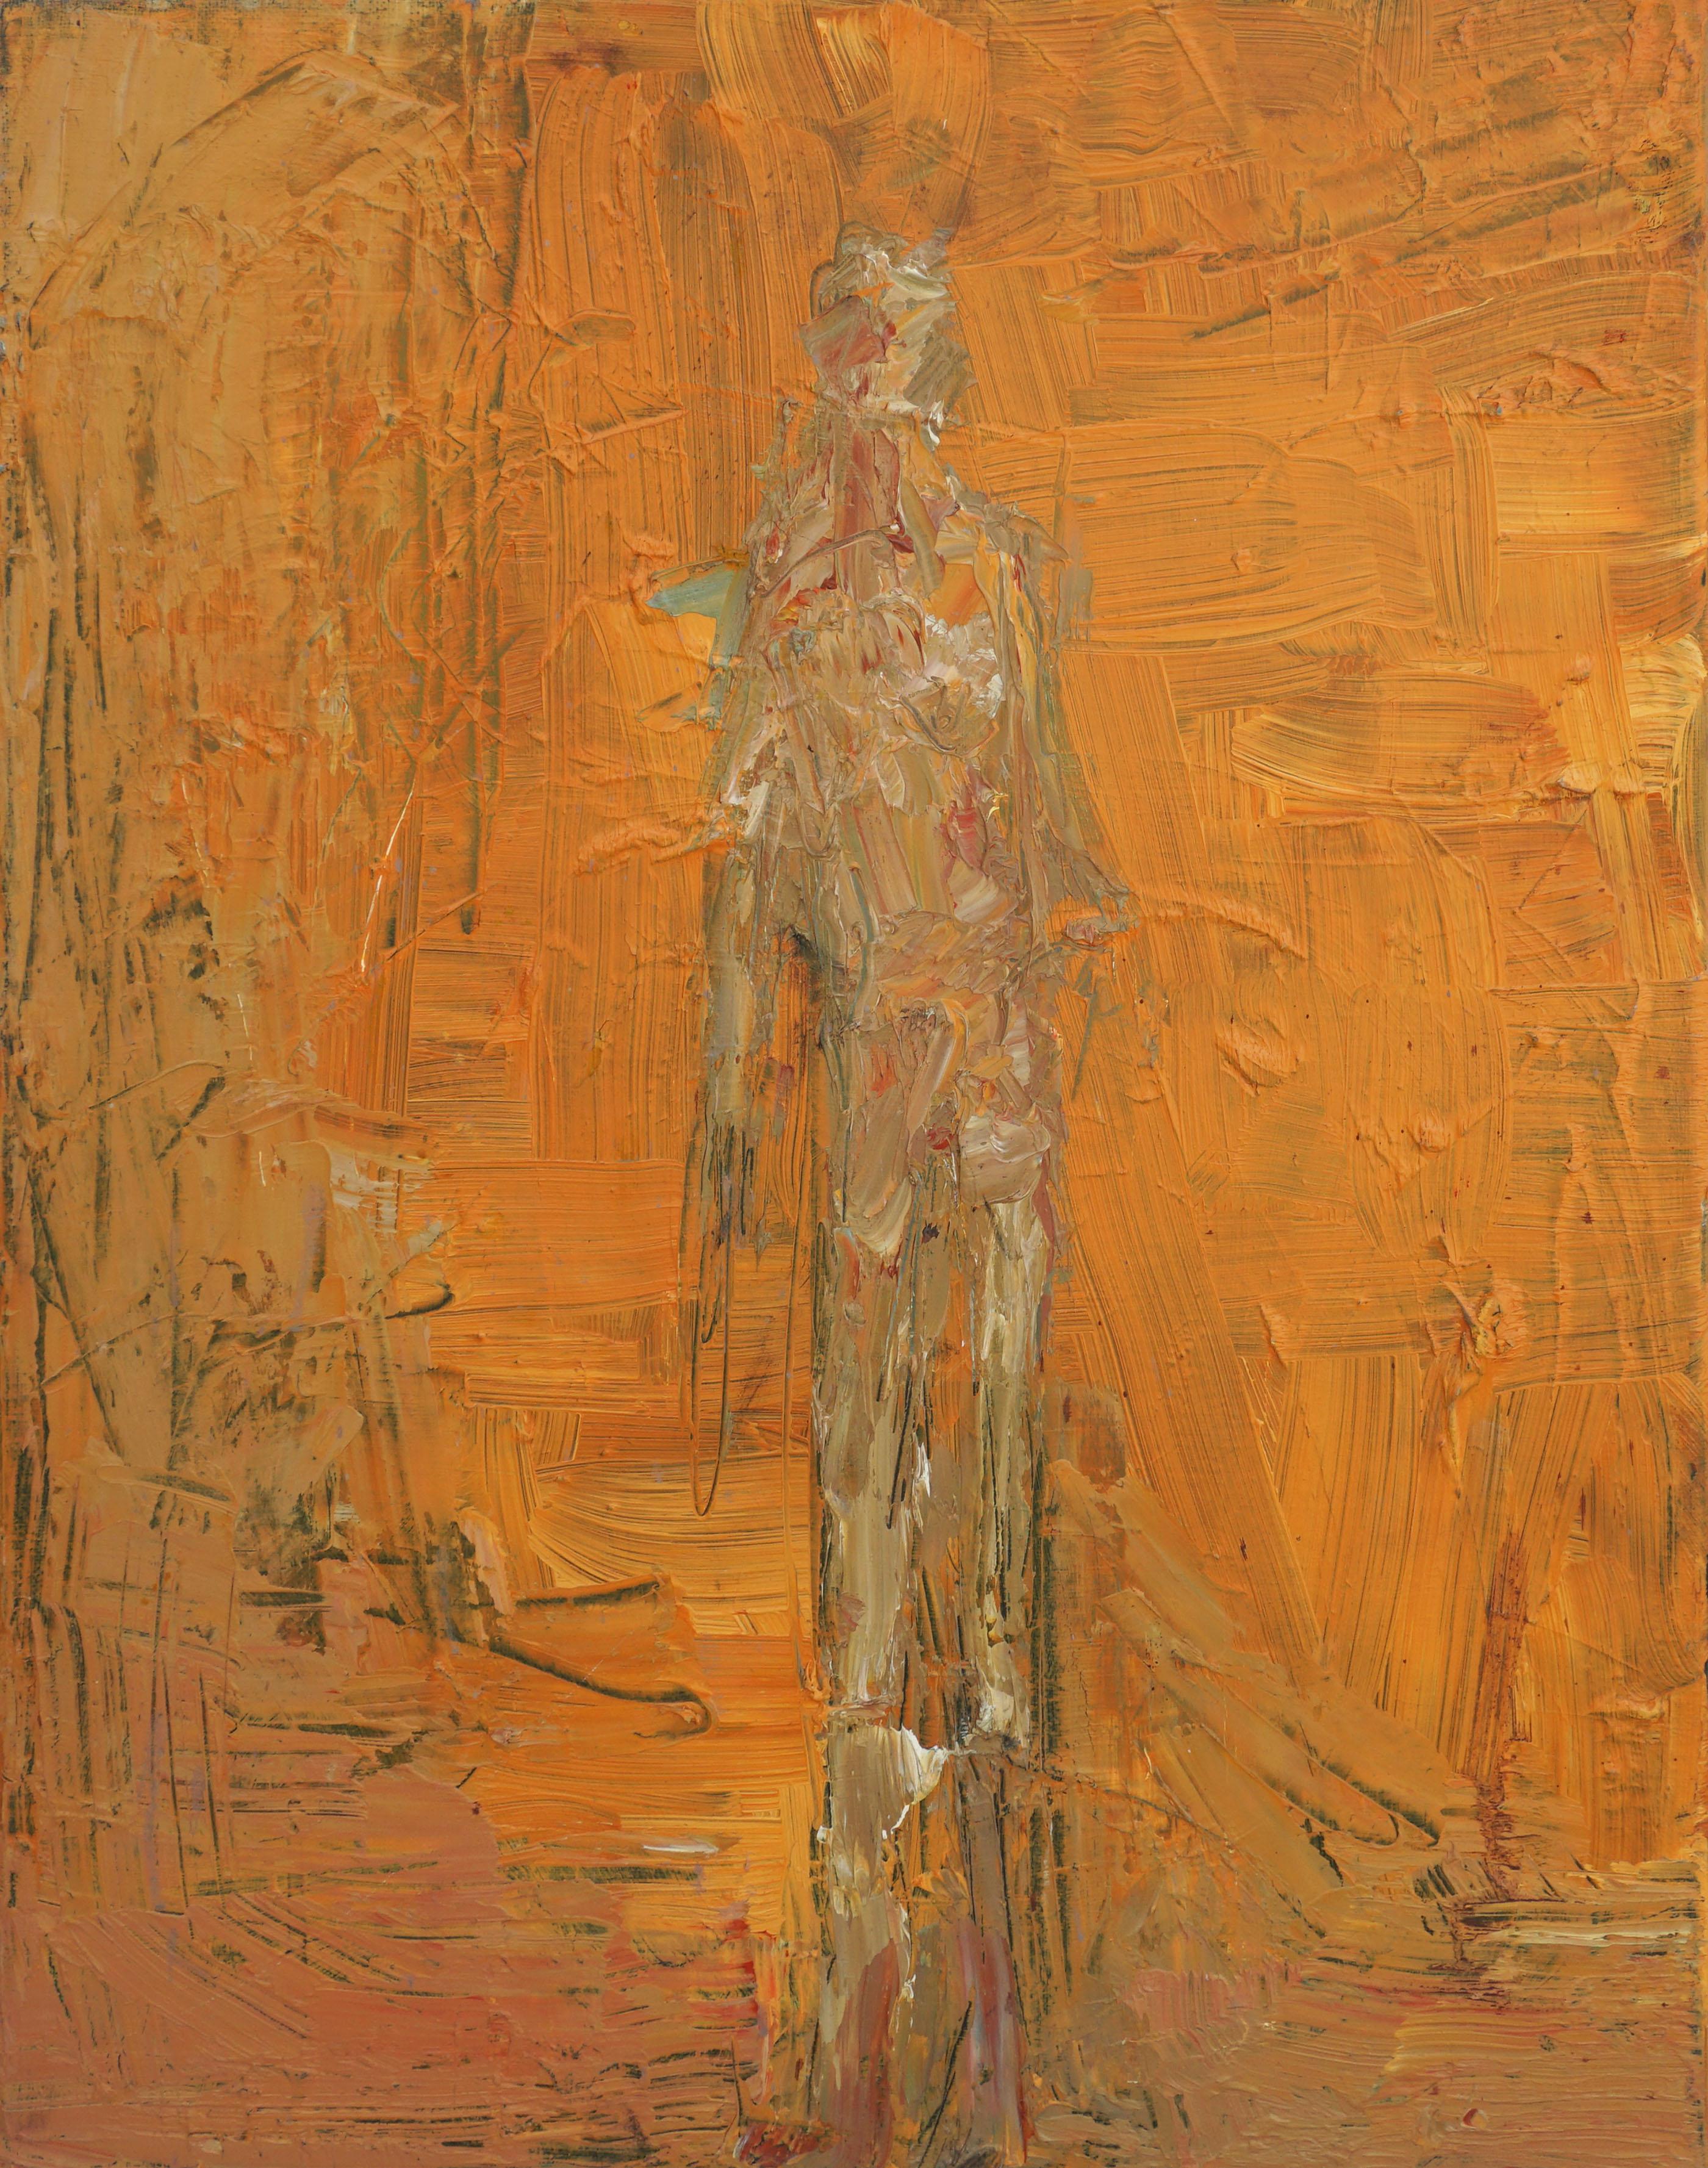 Daniel David Fuentes Abstract Painting - Abstract Expressionist Orange Man Figurative